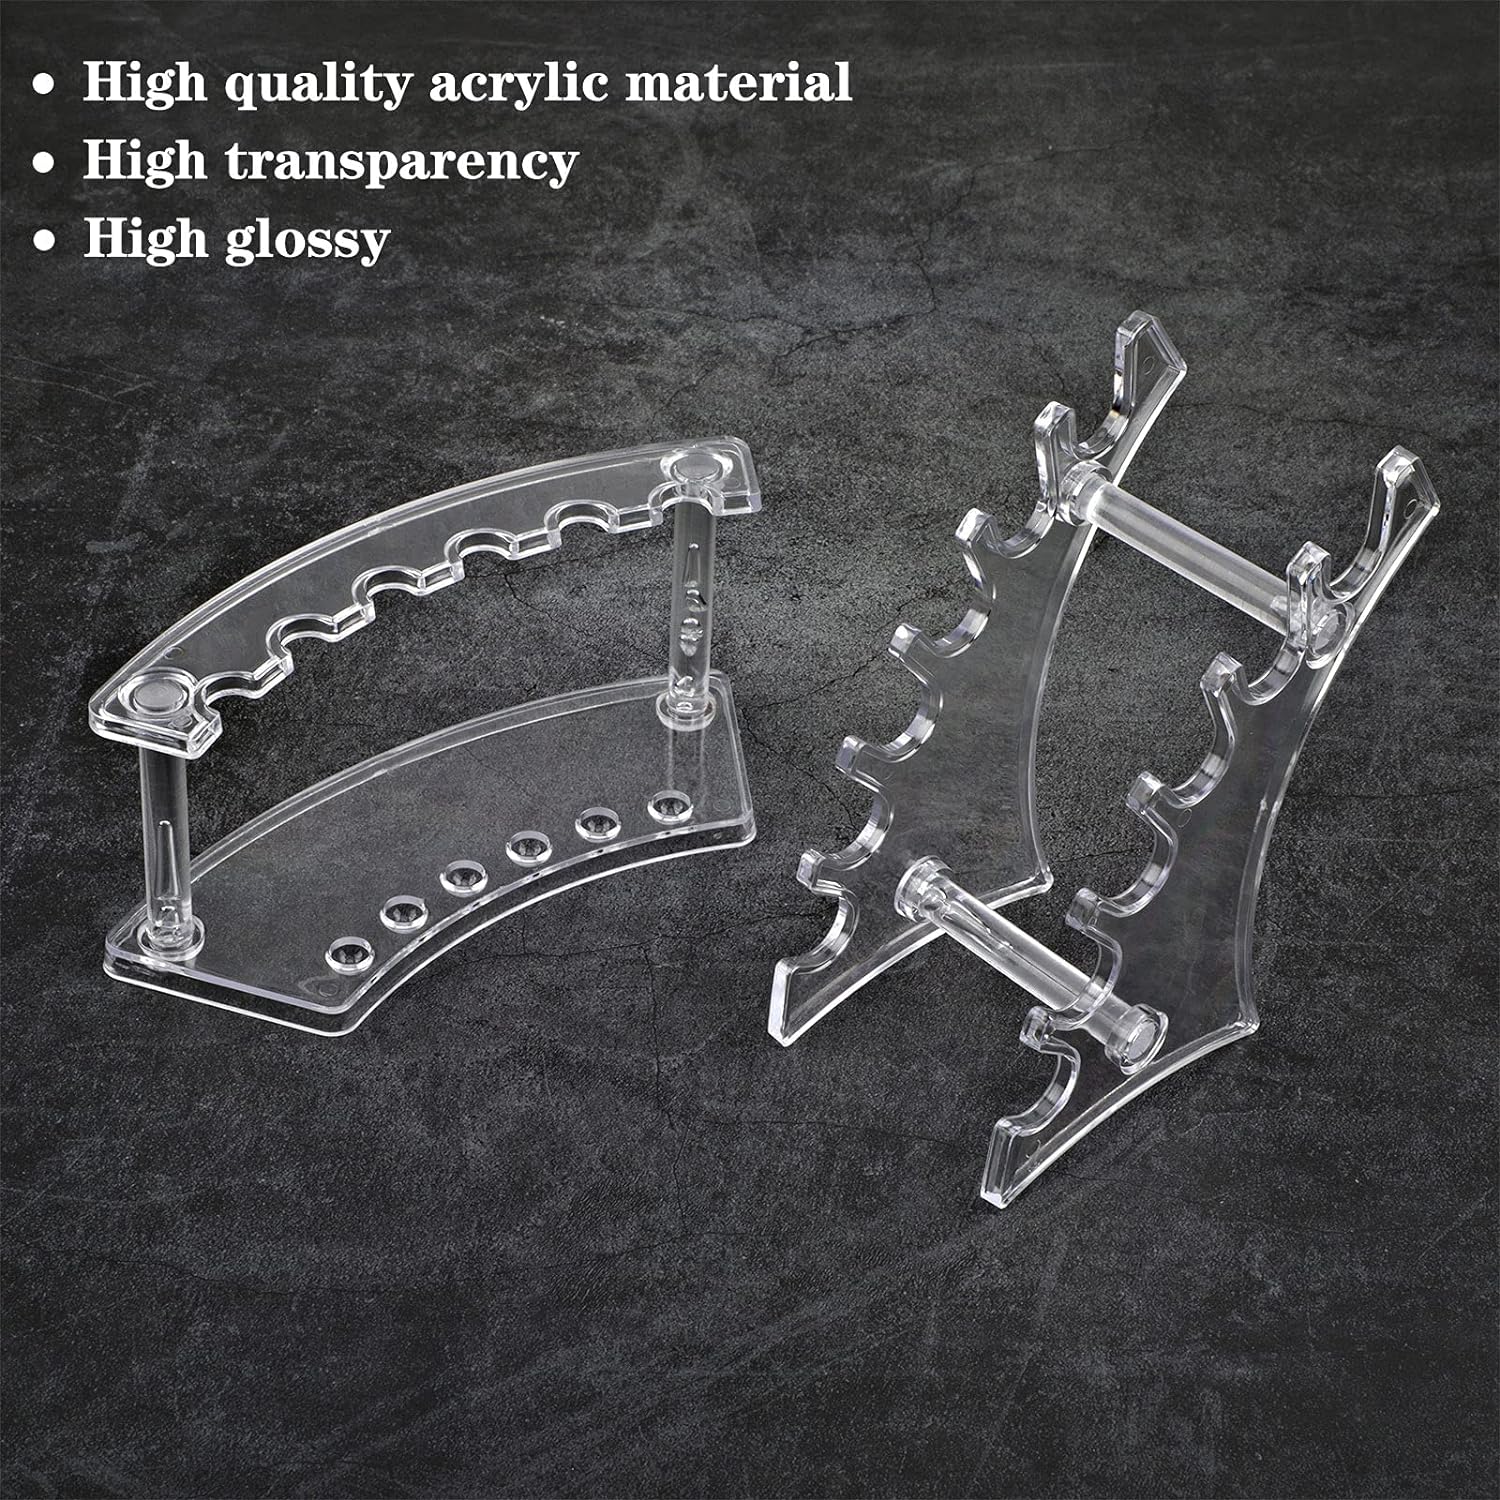 4PCS Acrylic Pen Holders Display Stand